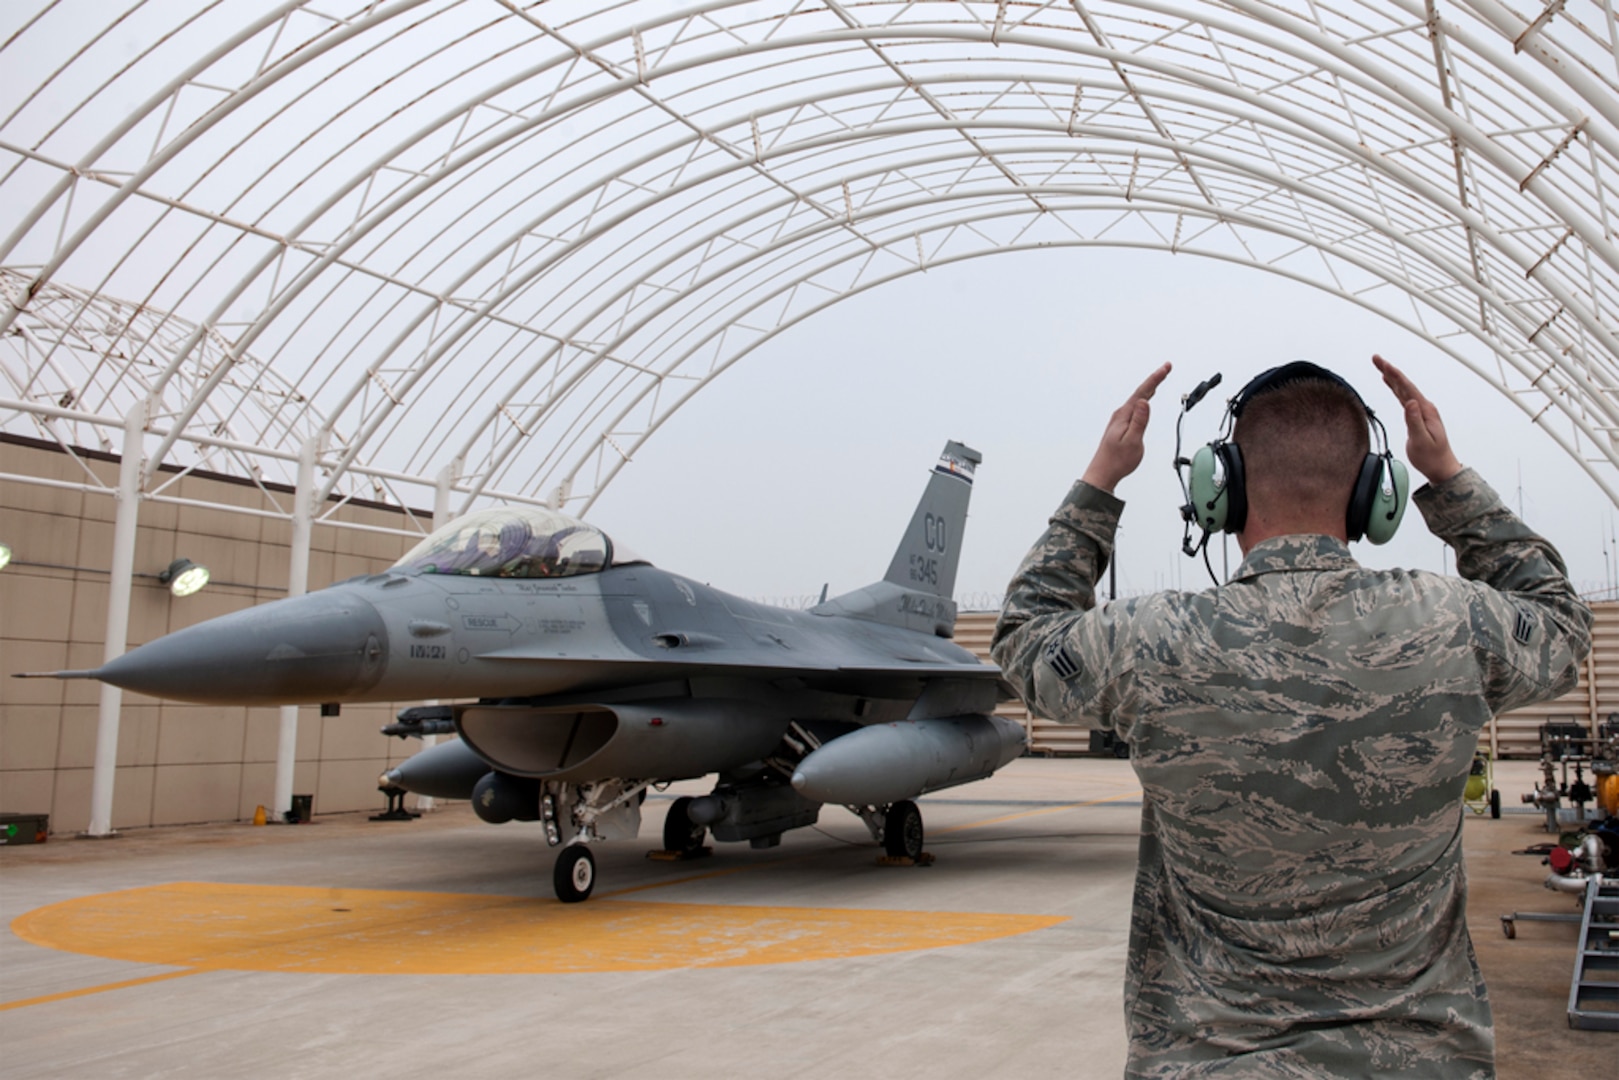 KUNSAN AIR BASE, Republic of Korea (Apr. 16, 2015) - Senior Airman Mitchell Jamison, 120th Expeditionary Aircraft Maintenance Unit crew chief, marshals his father, Lt. Col. James Reeman, 120th Expeditionary Fighter Squadron F-16 Fighting Falcon pilot. Following in the steps of Reeman's father, who served 18 months in the ROK as an enlisted Marine in the 1950's, this is both Reeman and Jamison's first time being not only deployed together, but the first time both Airmen have been to the ROK. 